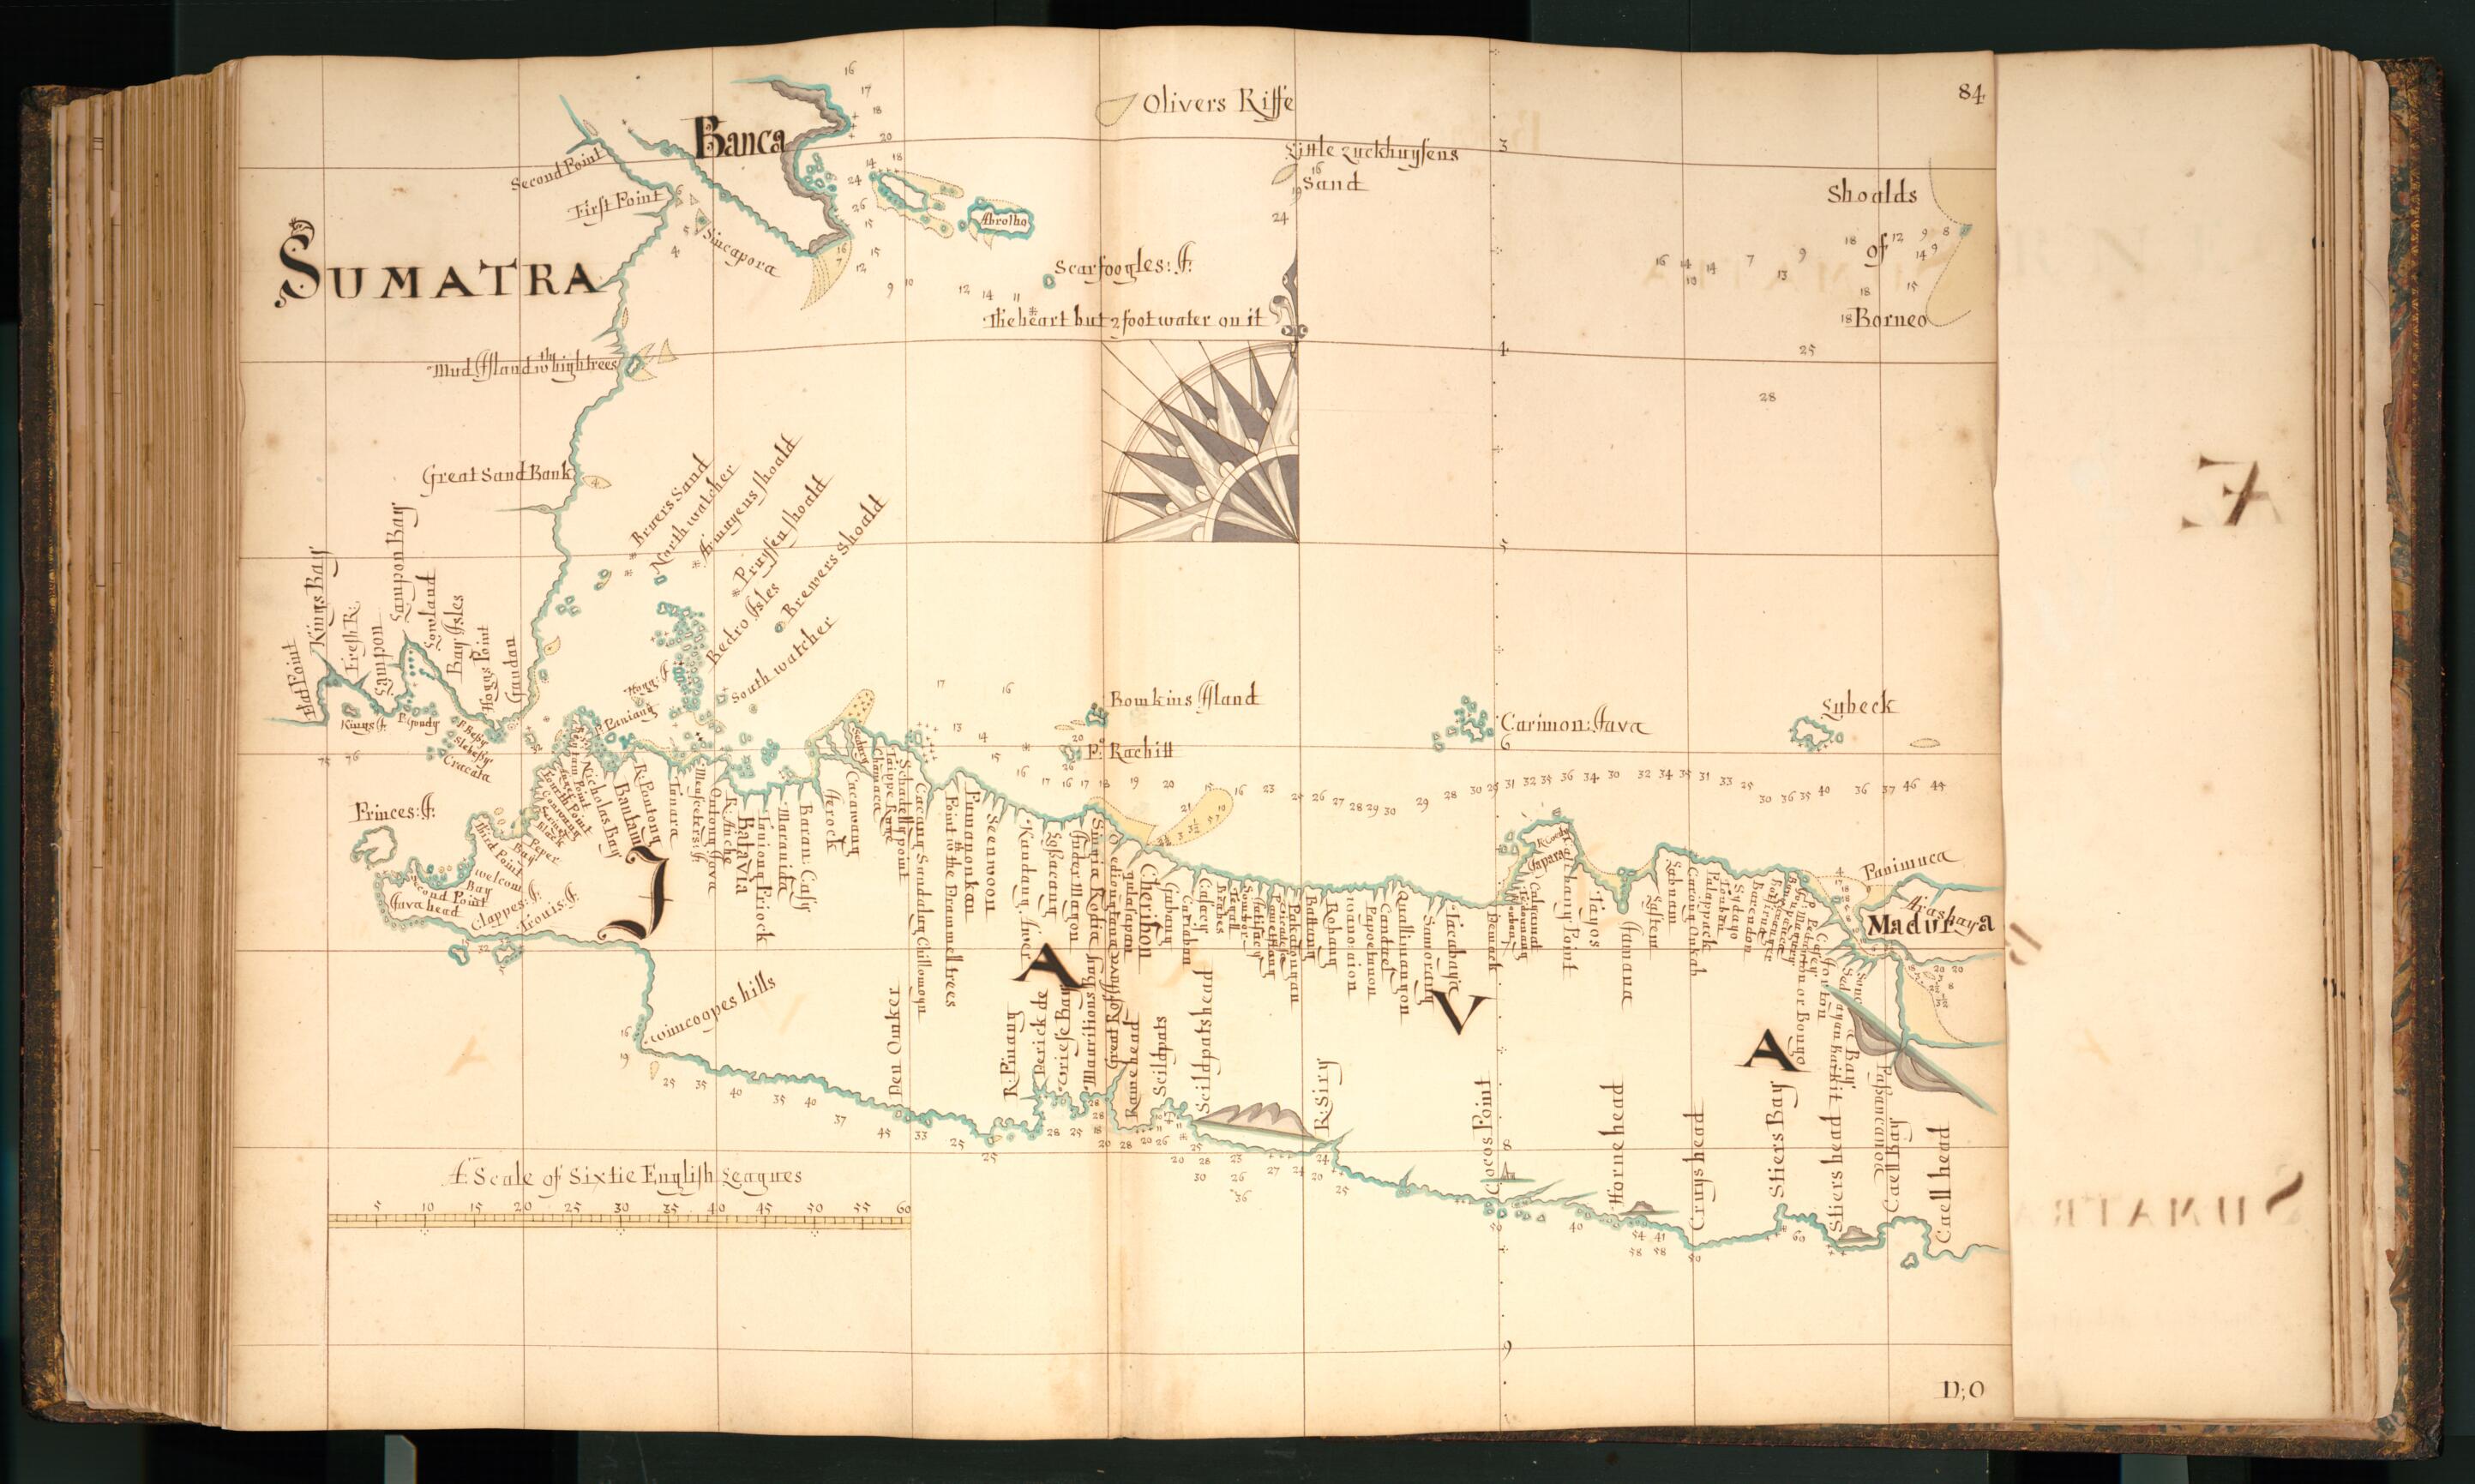 This old map of 84) Sumatra, Java from Buccaneer Atlas from 1690 was created by William Hacke in 1690